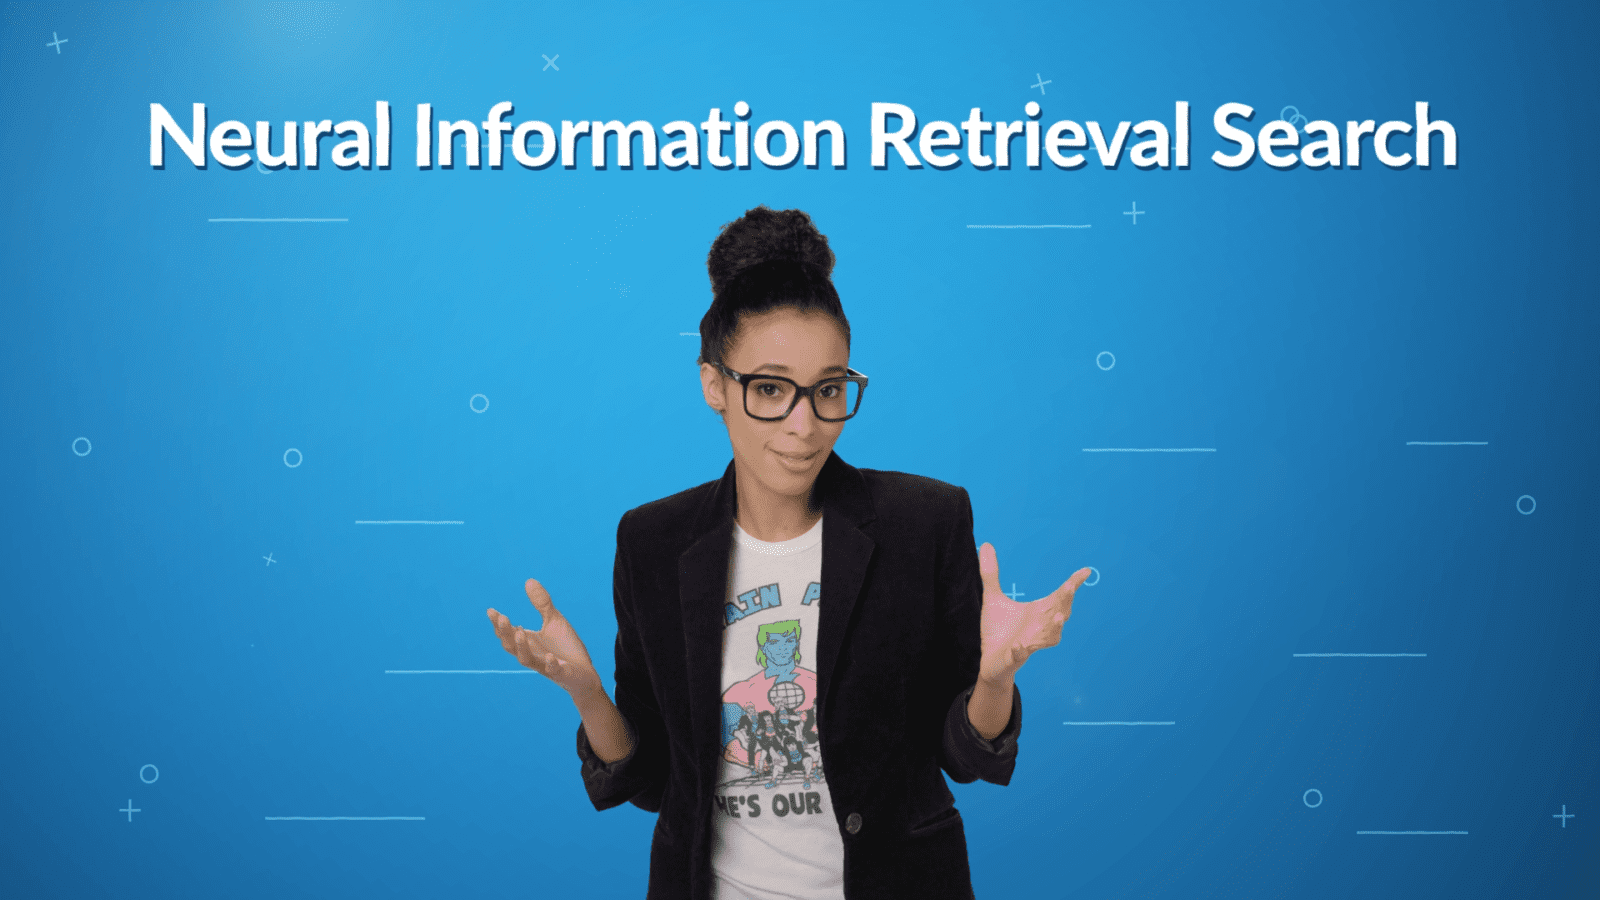 Video host against blue background with text 'Neural Information Retrieval Search'